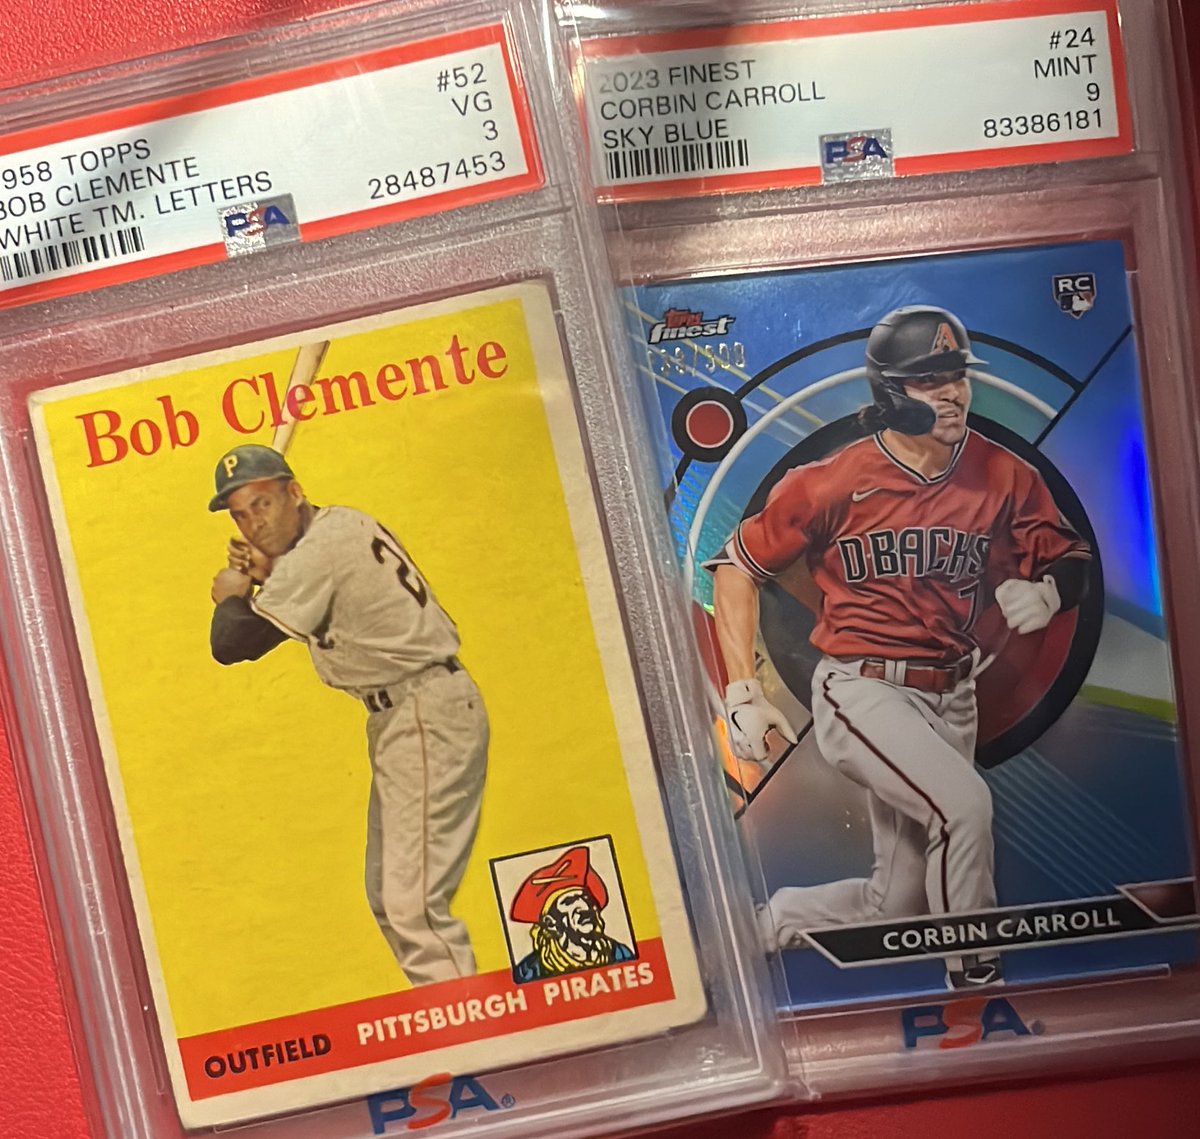 Mailday from @BsblCards! Been a customer since 2020. Finally added my first-ever Clemente to the PC! Always great deals on autos, modern, and vintage! #whodoyoucollect